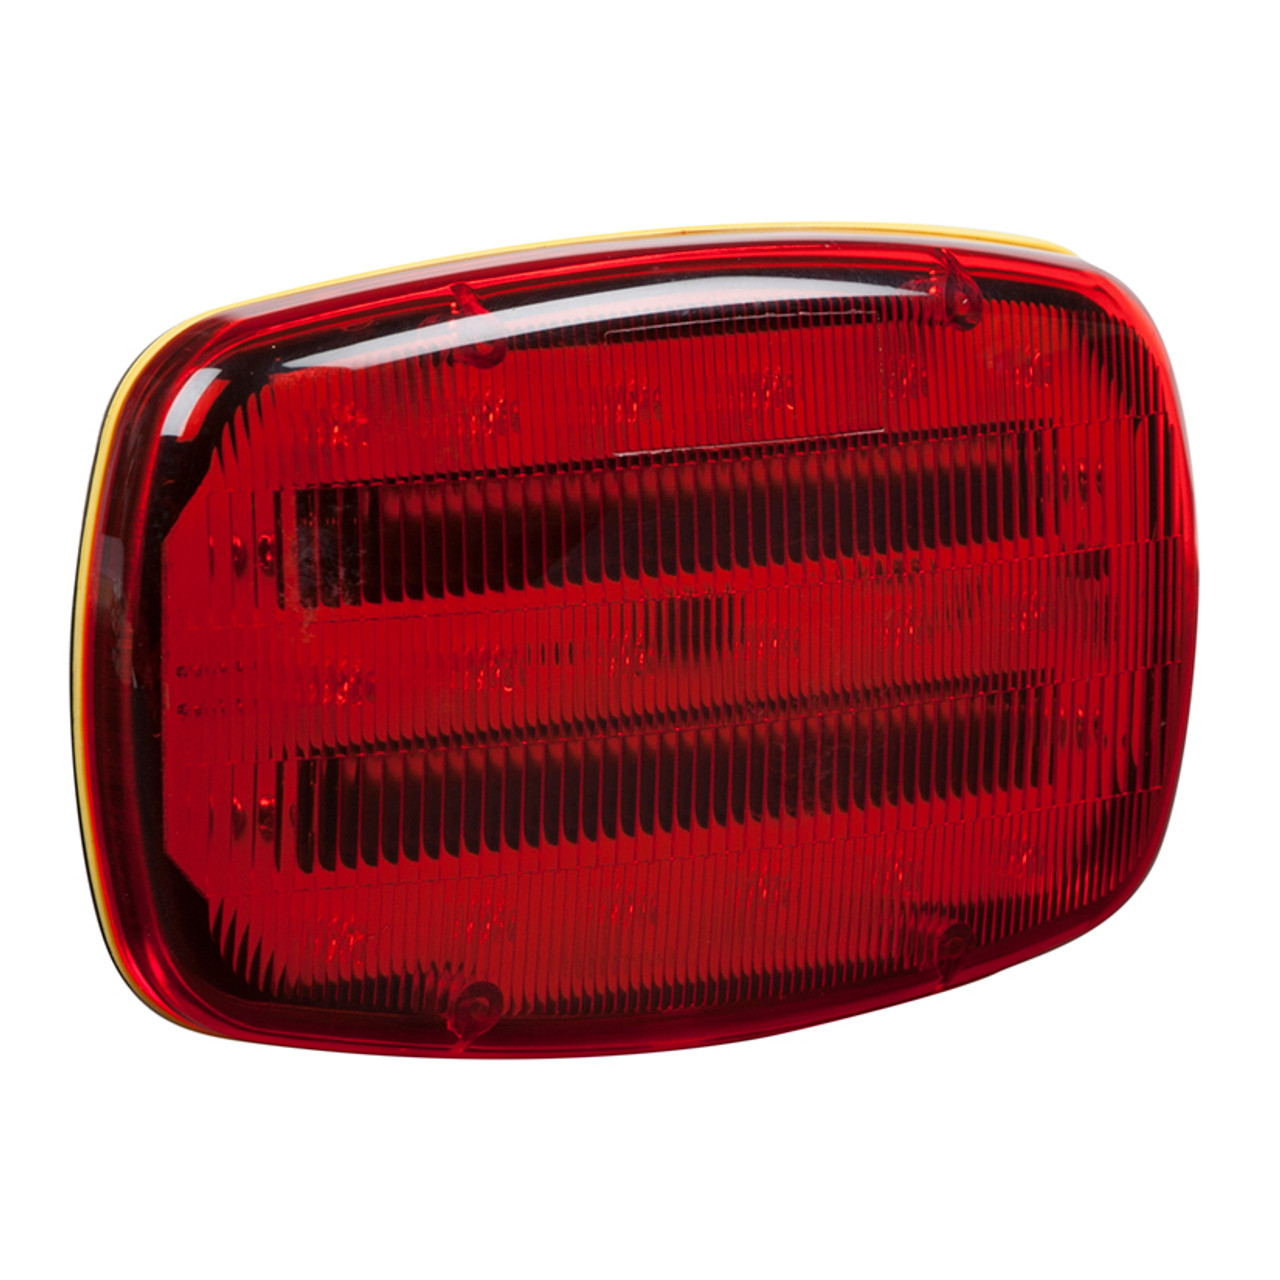 Magnetic Battery-Operated LED Warning Lamp - Retail - Red  79202-5